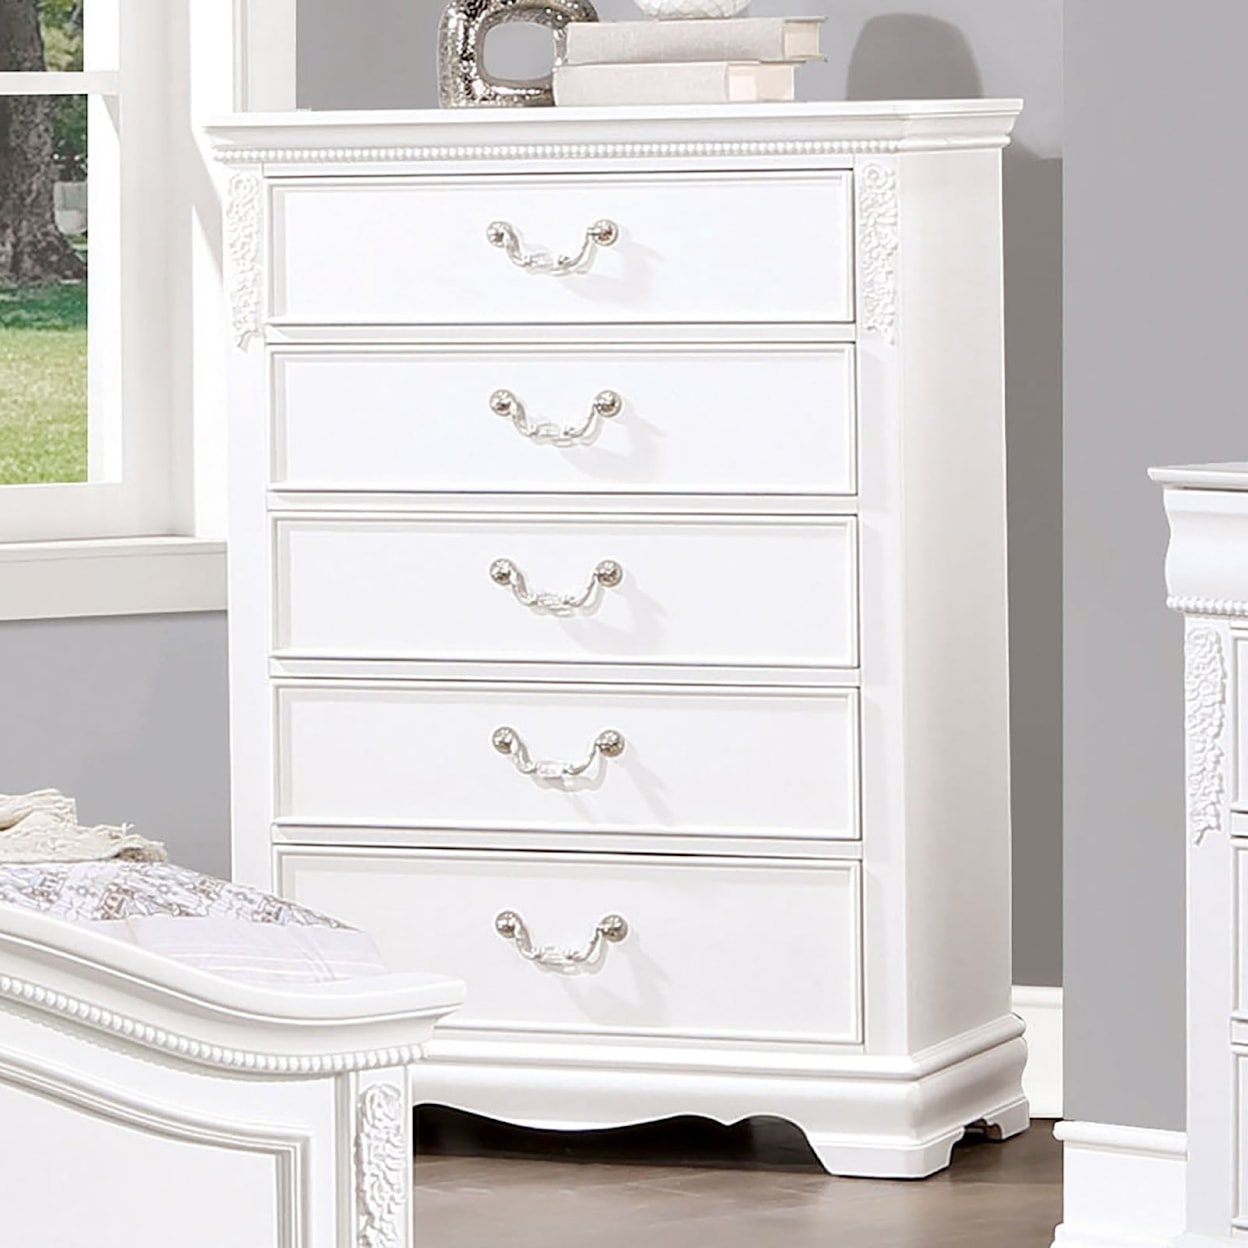 Furniture of America Alecia 5-Drawer Chest with Carved Wood Accents